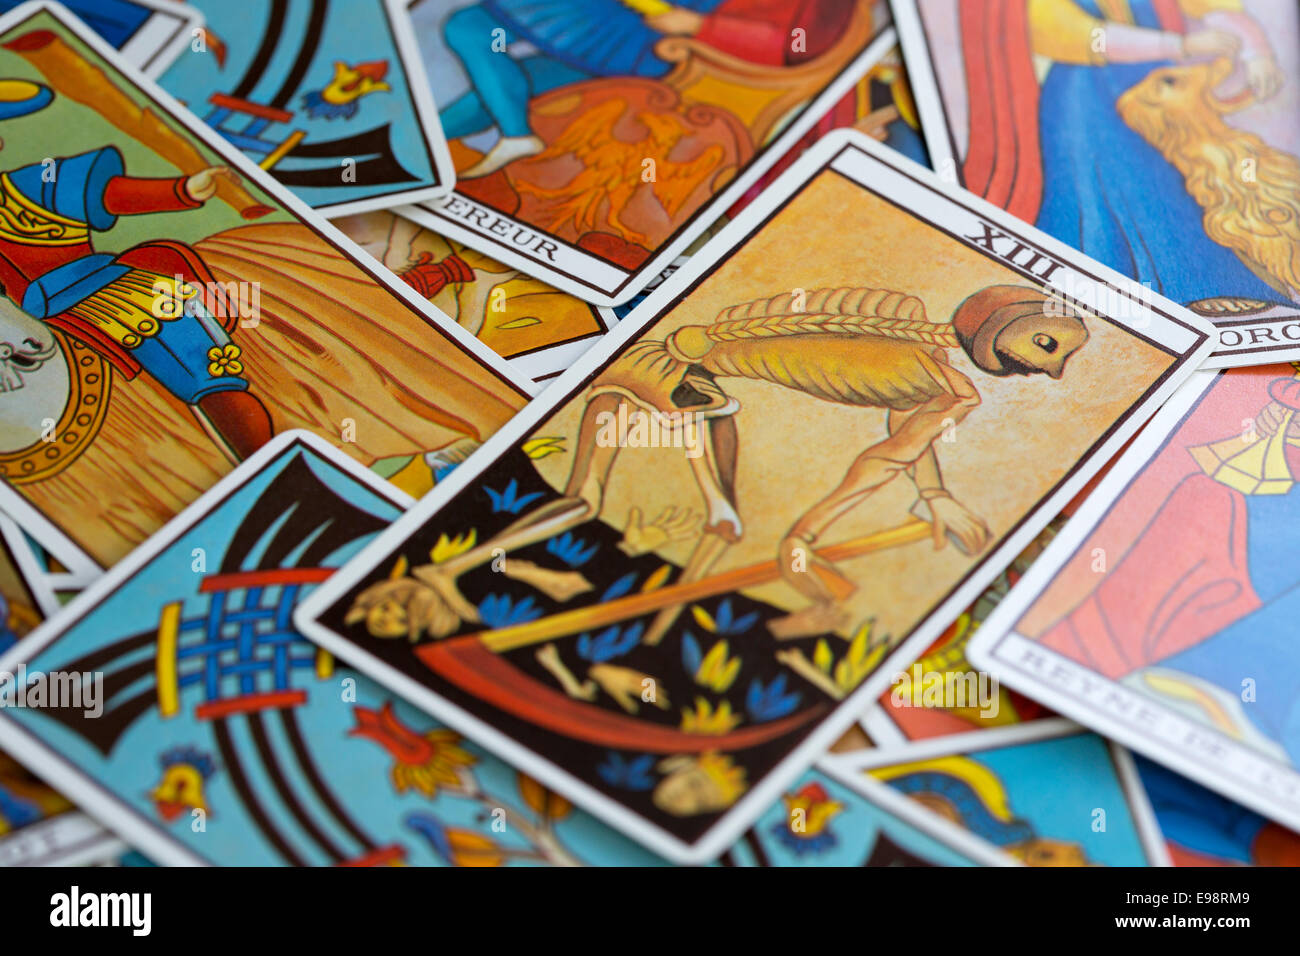 tarot cards spread out on table Stock Photo